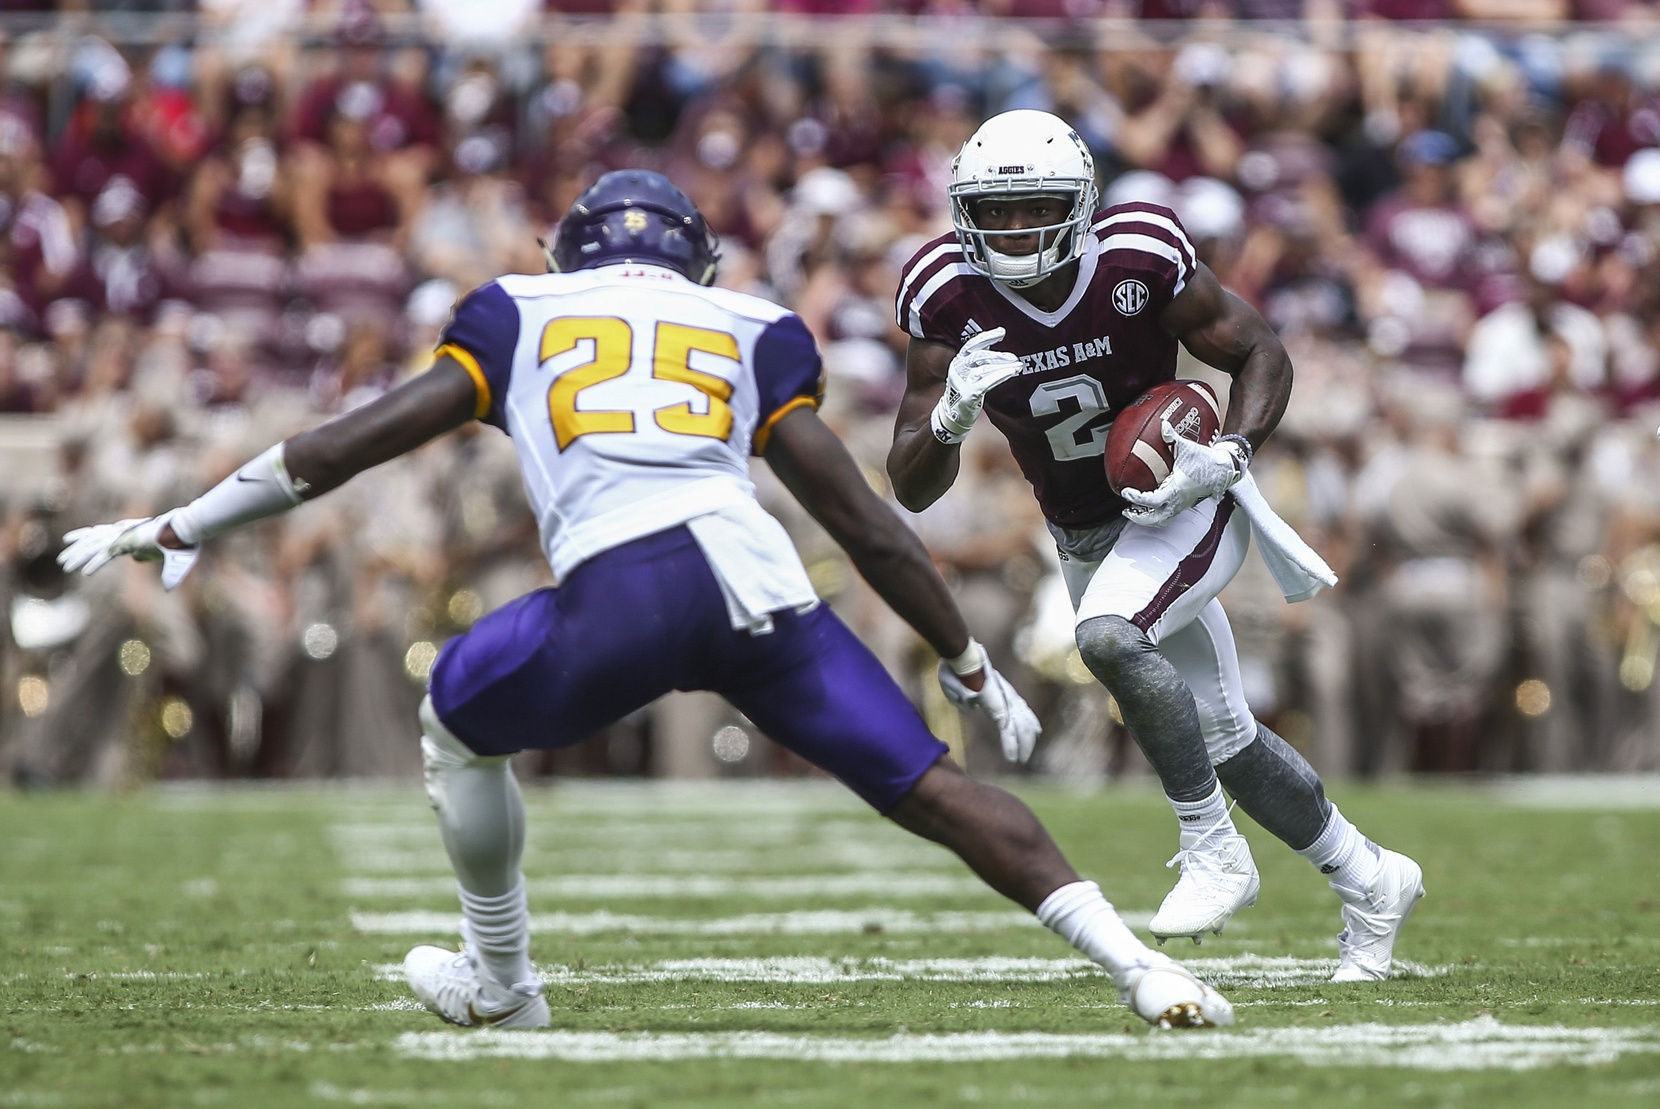 Sep 10, 2016; College Station, TX, USA; Texas A&M Aggies wide receiver Speedy Noil (2) makes a reception as Prairie View A&M Panthers cornerback Terrence Singleton (25) defends during the second quarter at Kyle Field. Mandatory Credit: Troy Taormina-USA TODAY Sports